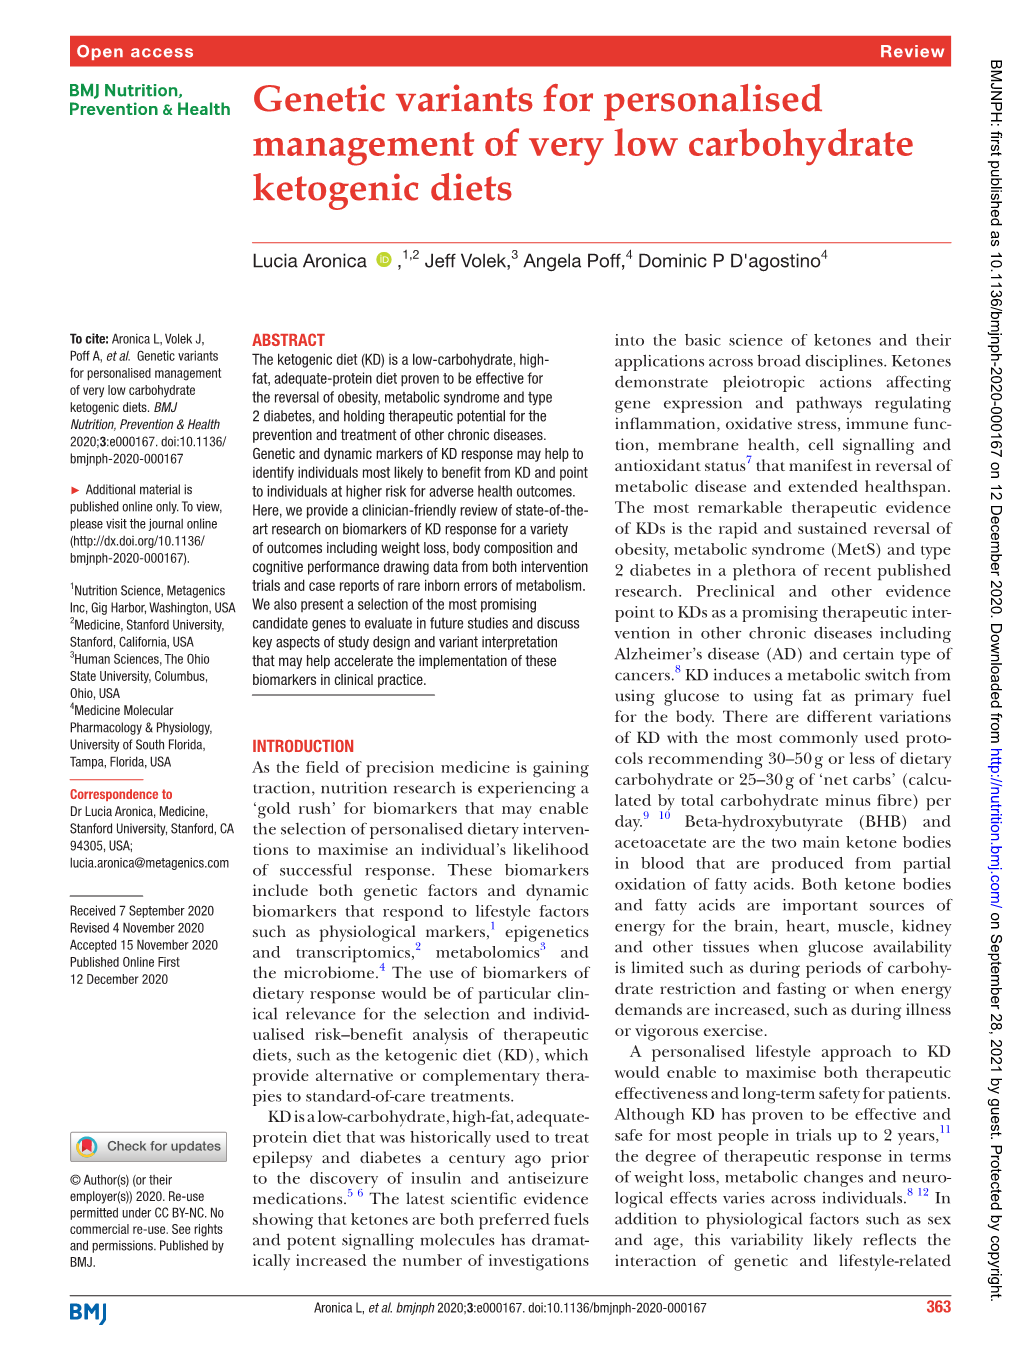 Genetic Variants for Personalised Management of Very Low Carbohydrate Ketogenic Diets